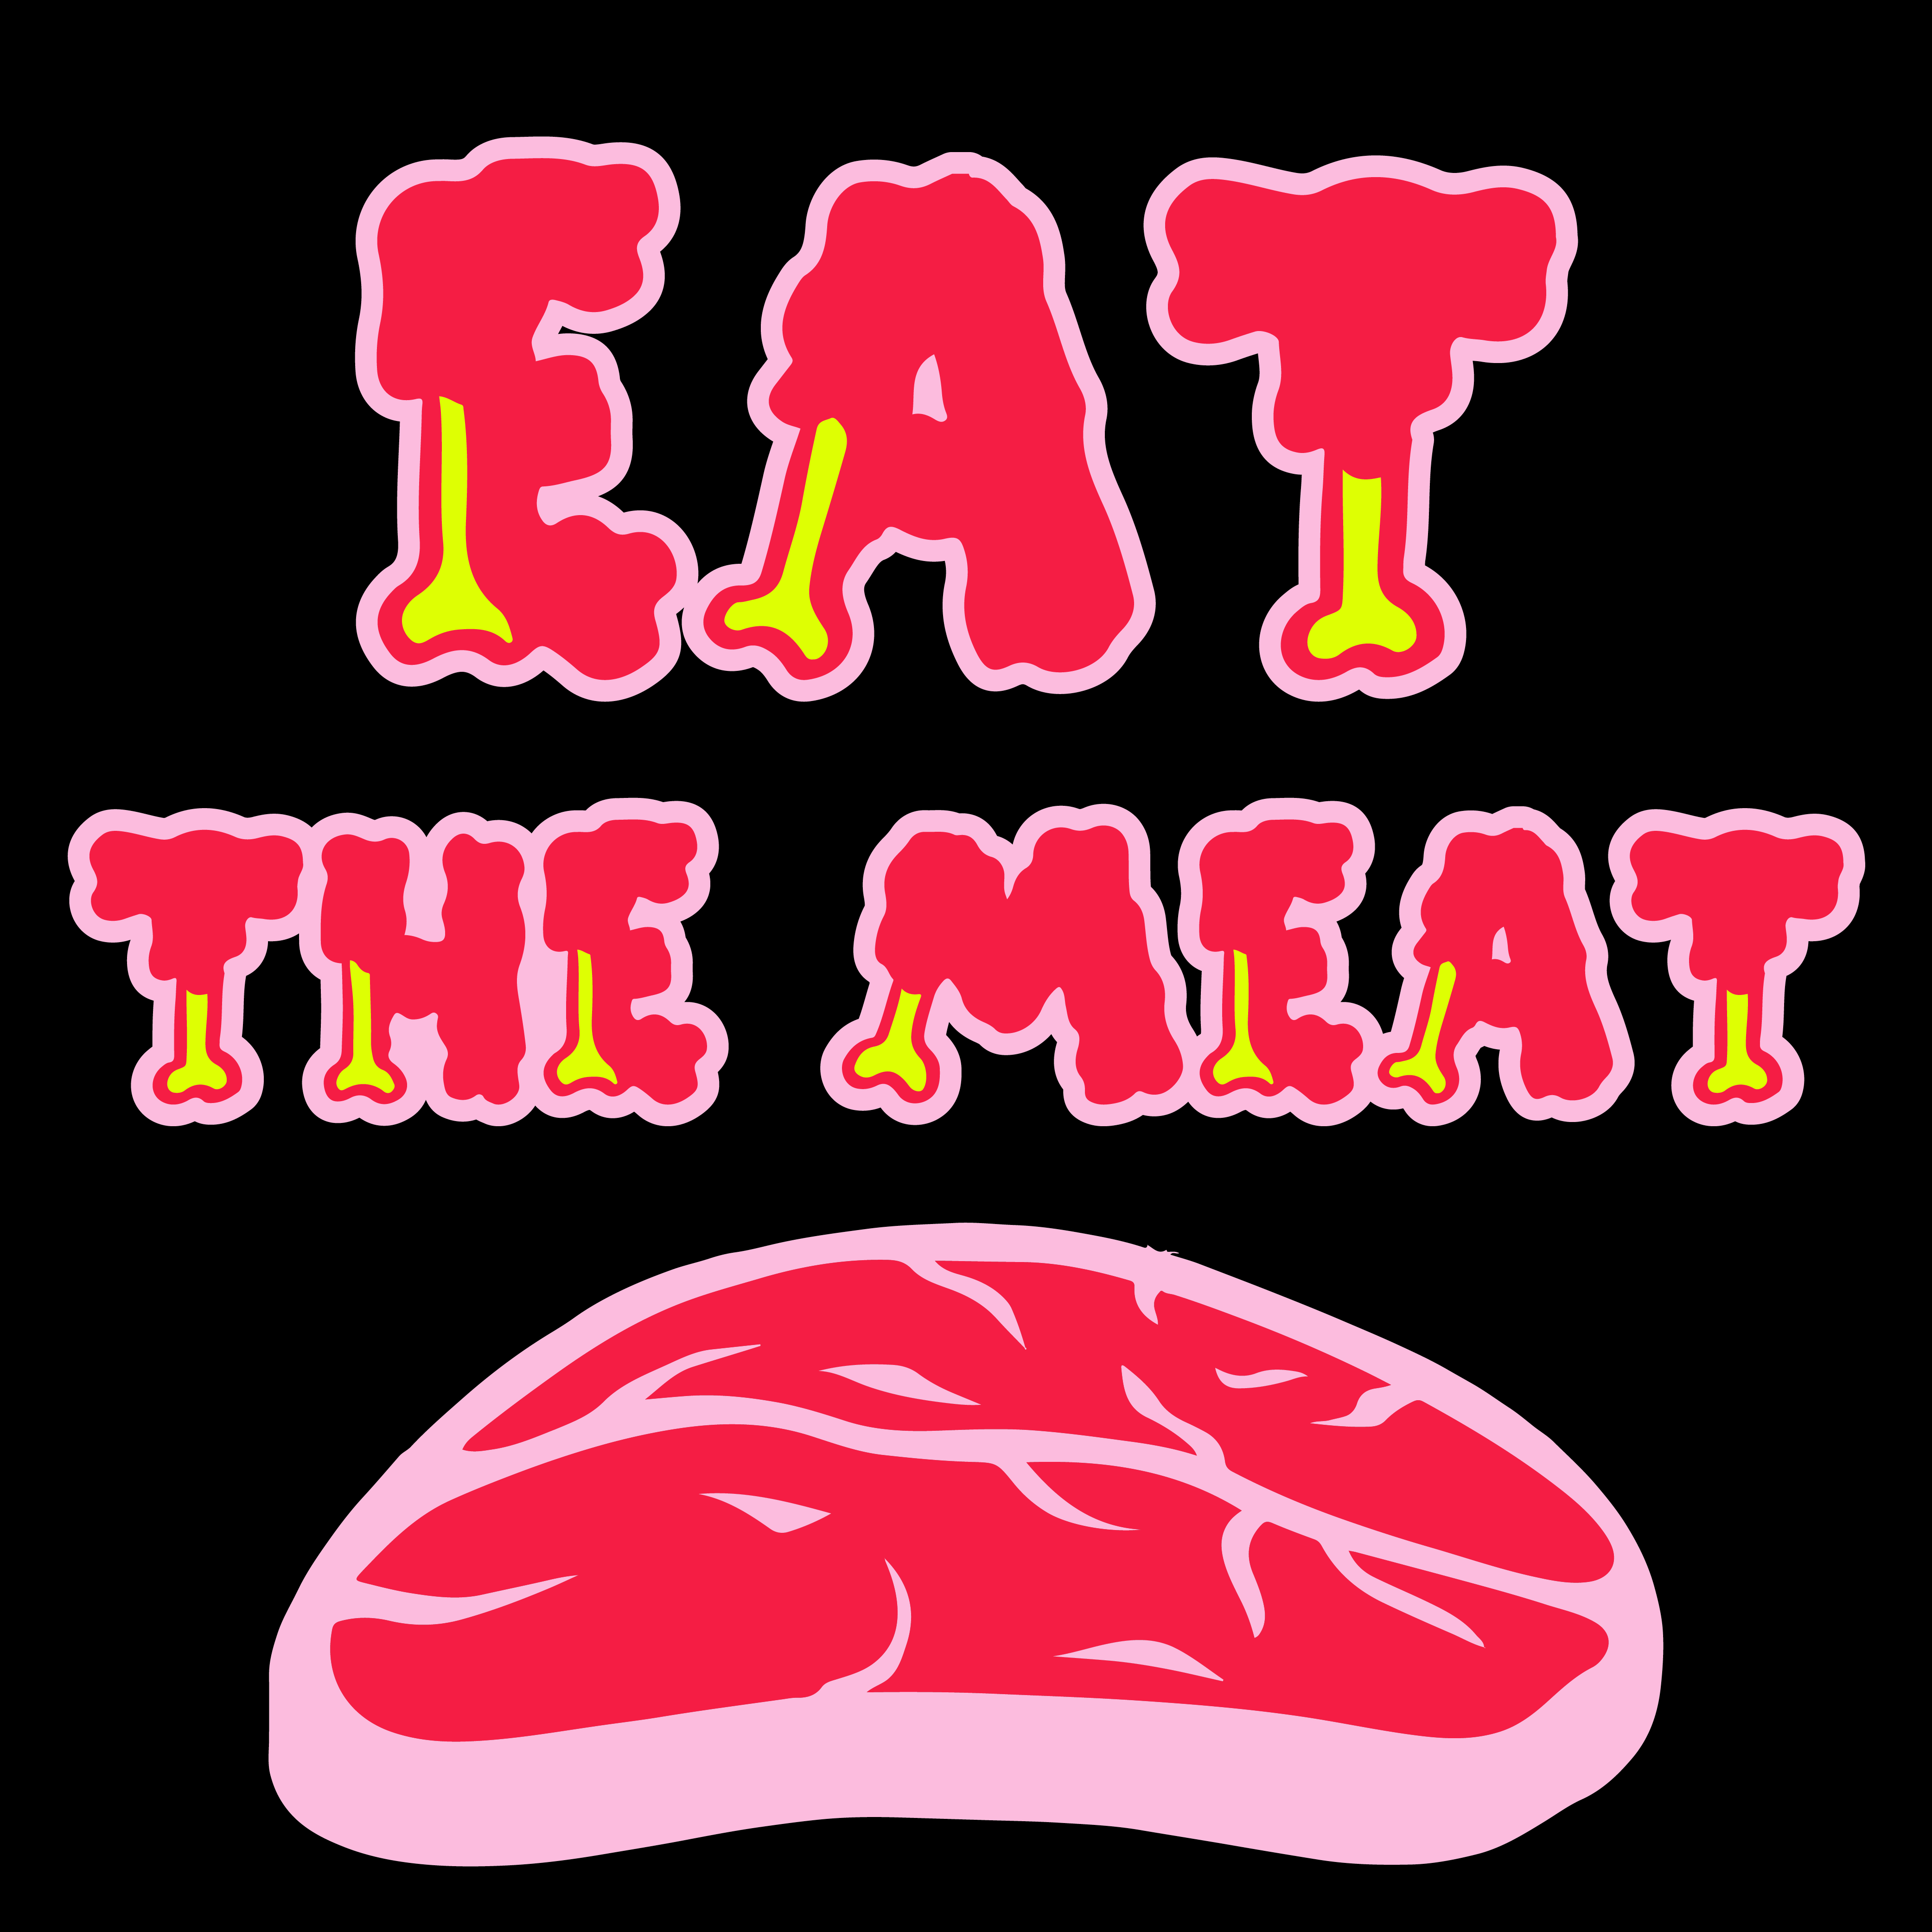 EAT THE MEAT